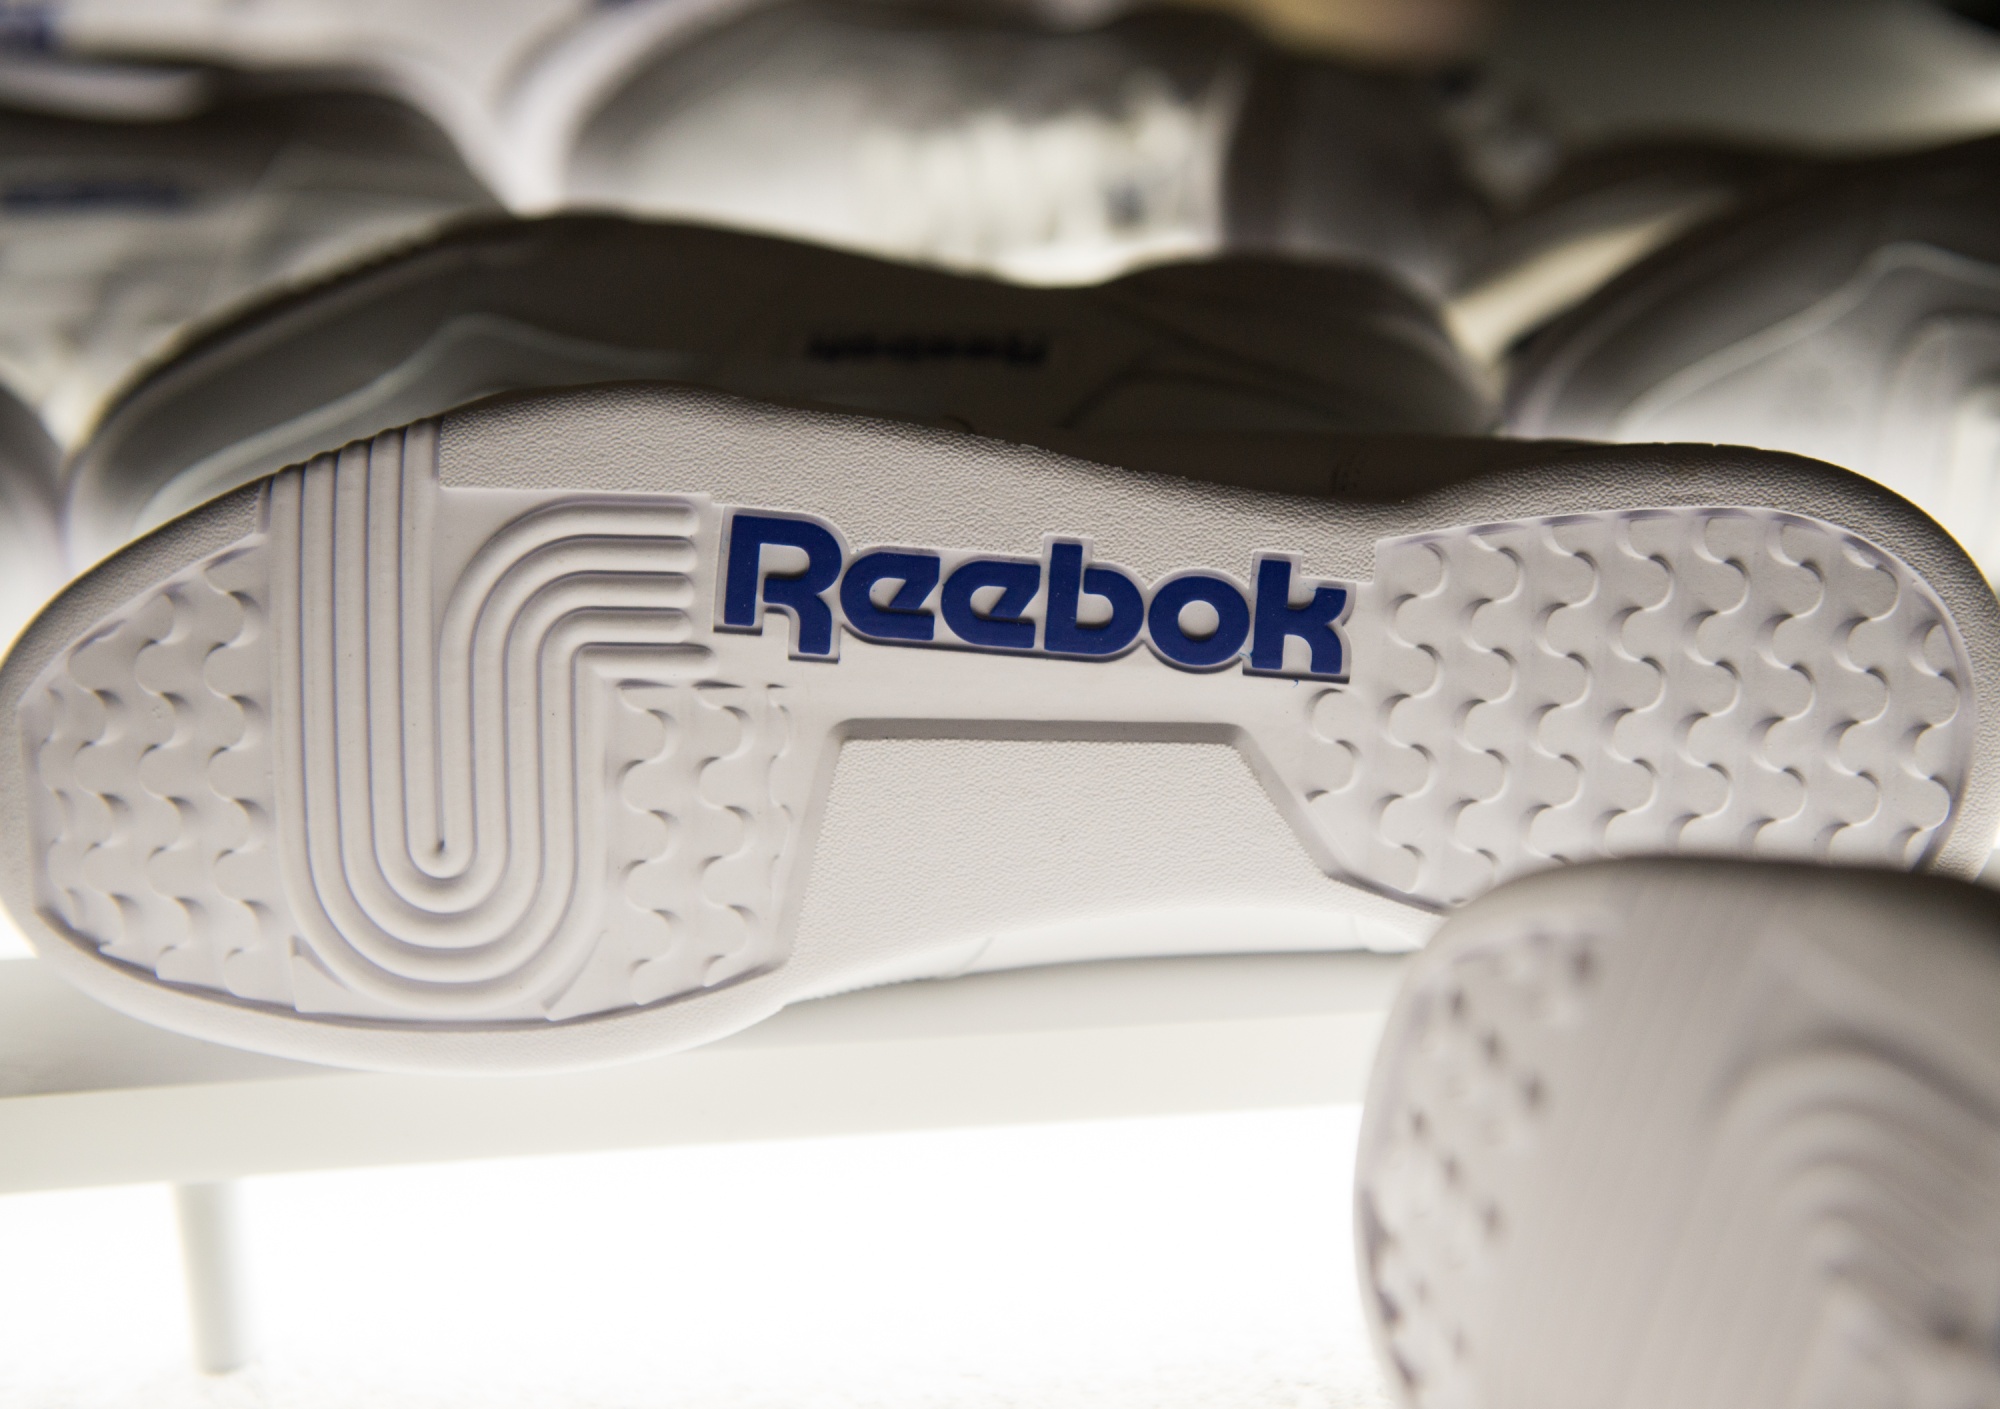 Adidas Sells Reebok But Will the Venerable Brand Come Back as a